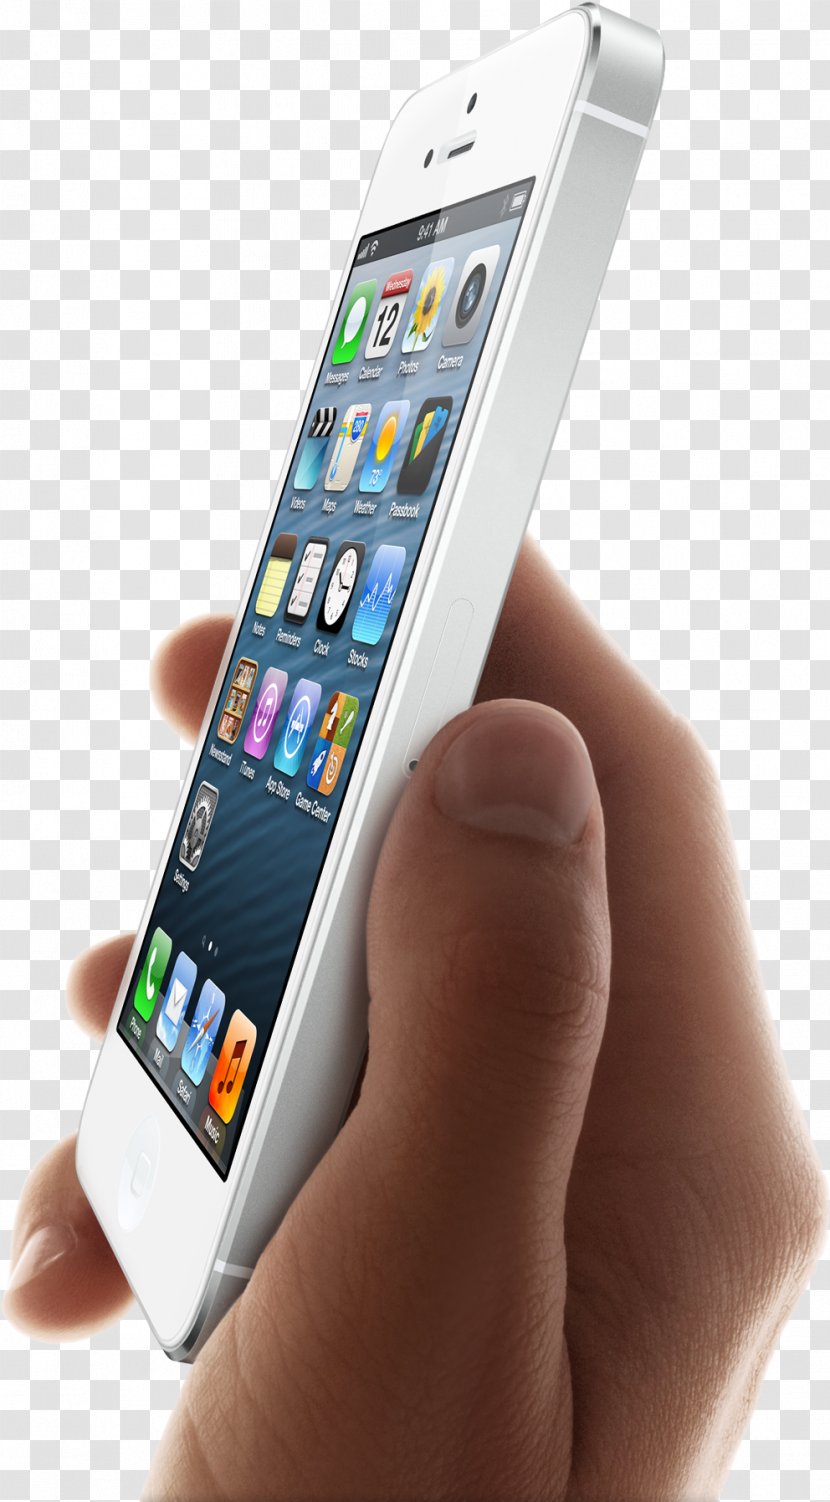 IPhone 5 4S Smartphone Apple - Iphone 4 Transparent PNG